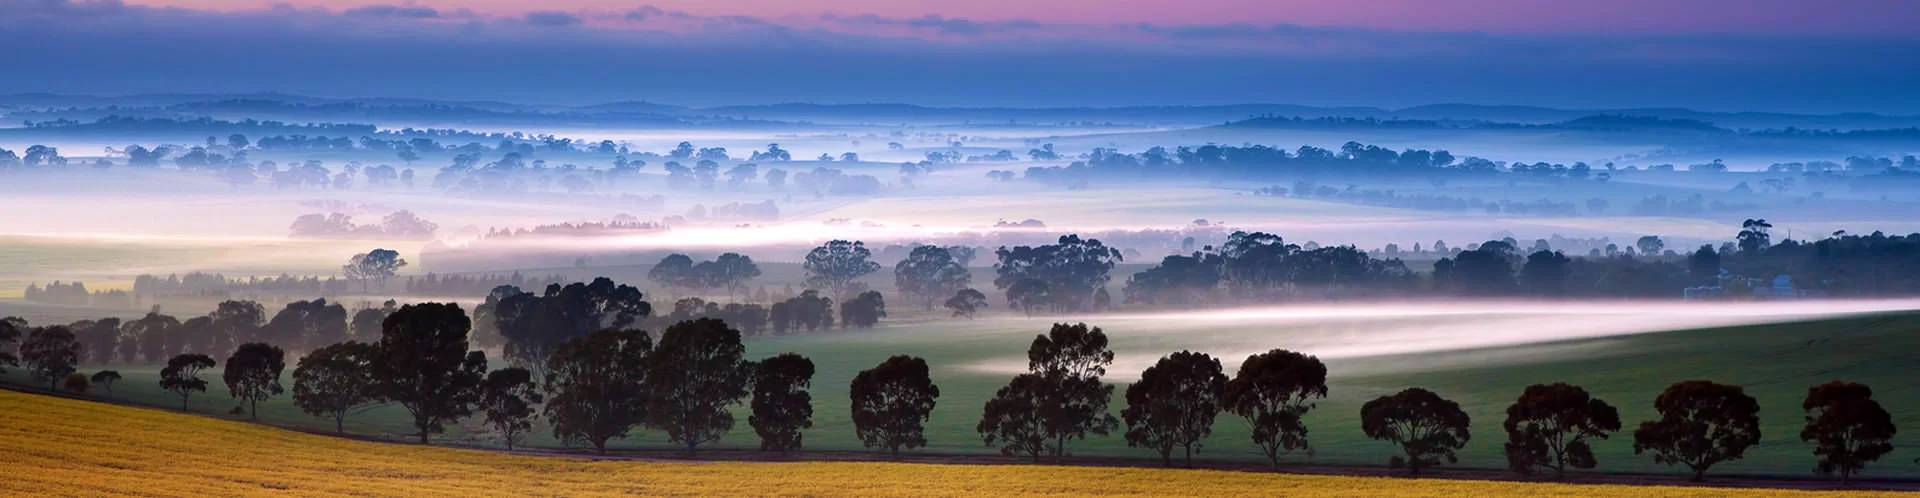 Clare Valley - South Australia